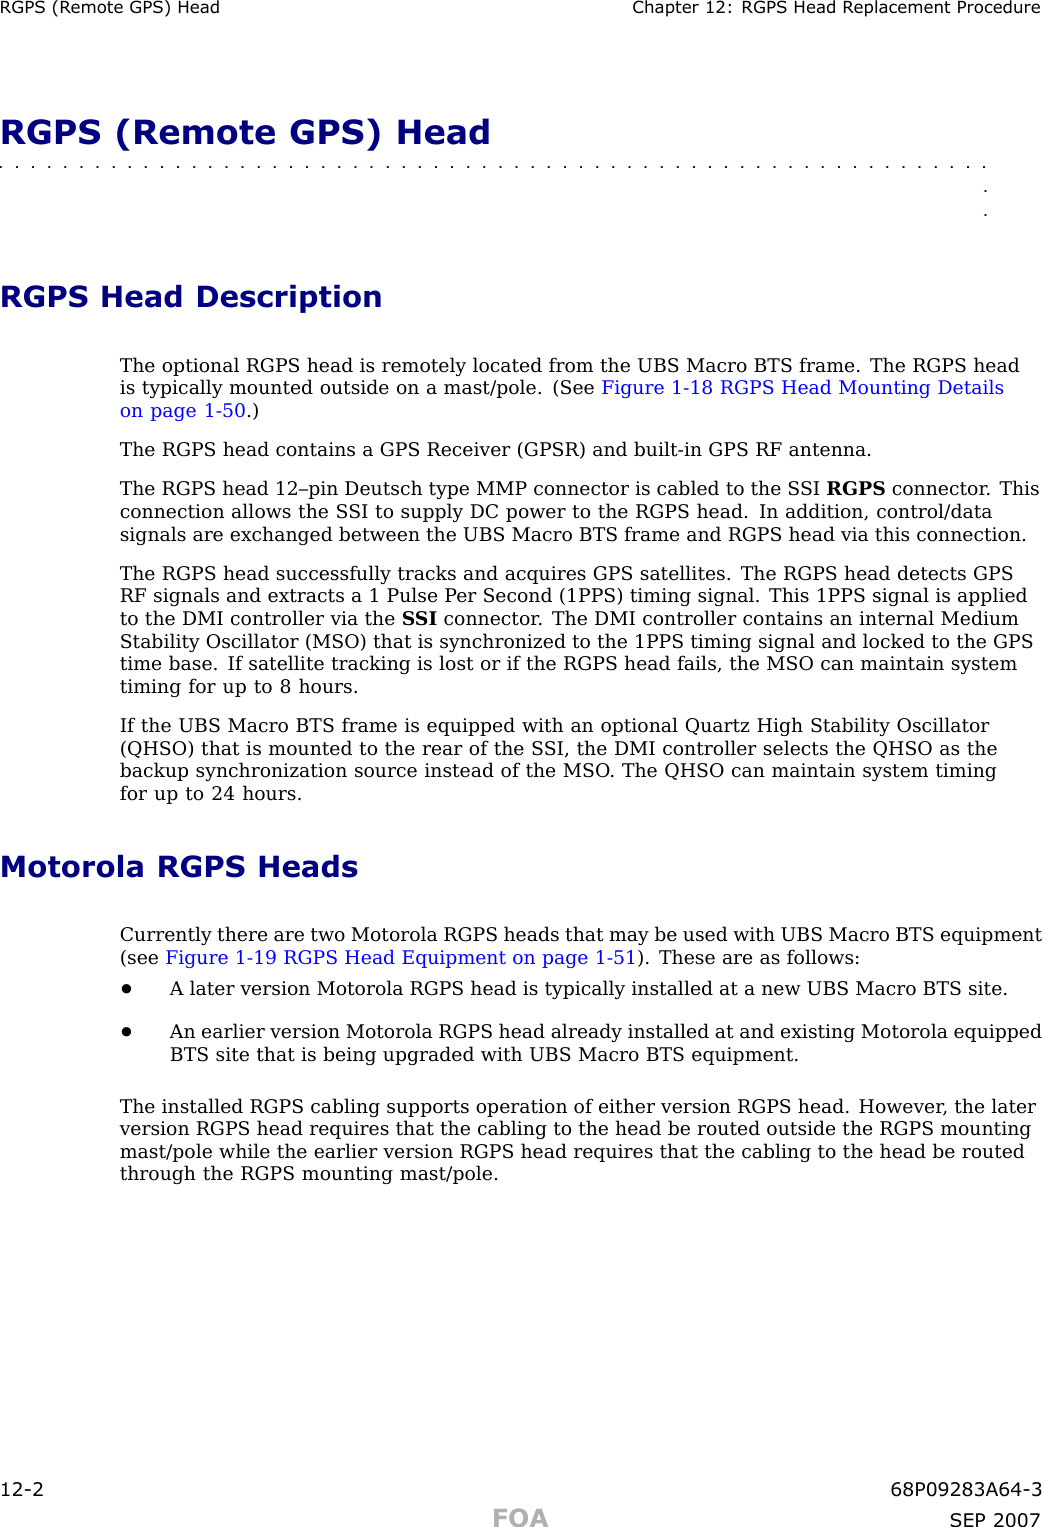 RGPS (R emote GPS) Head Chapter 12: RGPS Head R eplacement ProcedureRGPS (Remote GPS) Head■■■■■■■■■■■■■■■■■■■■■■■■■■■■■■■■■■■■■■■■■■■■■■■■■■■■■■■■■■■■■■■■RGPS Head DescriptionThe optional RGPS head is remotely located from the UBS Macro BTS frame. The RGPS headis typically mounted outside on a mast/pole. (See Figure 1 -18 RGPS Head Mounting Detailson page 1 - 50 .)The RGPS head contains a GPS Receiver (GPSR) and built -in GPS RF antenna.The RGPS head 12–pin Deutsch type MMP connector is cabled to the S SI RGPS connector . Thisconnection allows the S SI to supply DC power to the RGPS head. In addition, control/datasignals are exchanged between the UBS Macro BTS frame and RGPS head via this connection.The RGPS head successfully tracks and acquires GPS satellites. The RGPS head detects GPSRF signals and extracts a 1 Pulse P er Second (1PPS) timing signal. This 1PPS signal is appliedto the DMI controller via the S SI connector . The DMI controller contains an internal MediumStability Oscillator (MSO) that is synchronized to the 1PPS timing signal and locked to the GPStime base. If satellite tracking is lost or if the RGPS head fails, the MSO can maintain systemtiming for up to 8 hours.If the UBS Macro BTS frame is equipped with an optional Quartz High Stability Oscillator(QHSO) that is mounted to the rear of the S SI, the DMI controller selects the QHSO as thebackup synchronization source instead of the MSO . The QHSO can maintain system timingfor up to 24 hours.Motorola RGPS HeadsCurrently there are two Motorola RGPS heads that may be used with UBS Macro BTS equipment(see Figure 1 -19 RGPS Head Equipment on page 1 - 51 ). These are as follows:•A later version Motorola RGPS head is typically installed at a new UBS Macro BTS site.•An earlier version Motorola RGPS head already installed at and existing Motorola equippedBTS site that is being upgraded with UBS Macro BTS equipment.The installed RGPS cabling supports operation of either version RGPS head. However , the laterversion RGPS head requires that the cabling to the head be routed outside the RGPS mountingmast/pole while the earlier version RGPS head requires that the cabling to the head be routedthrough the RGPS mounting mast/pole.12 -2 68P09283A64 -3FOA SEP 2007